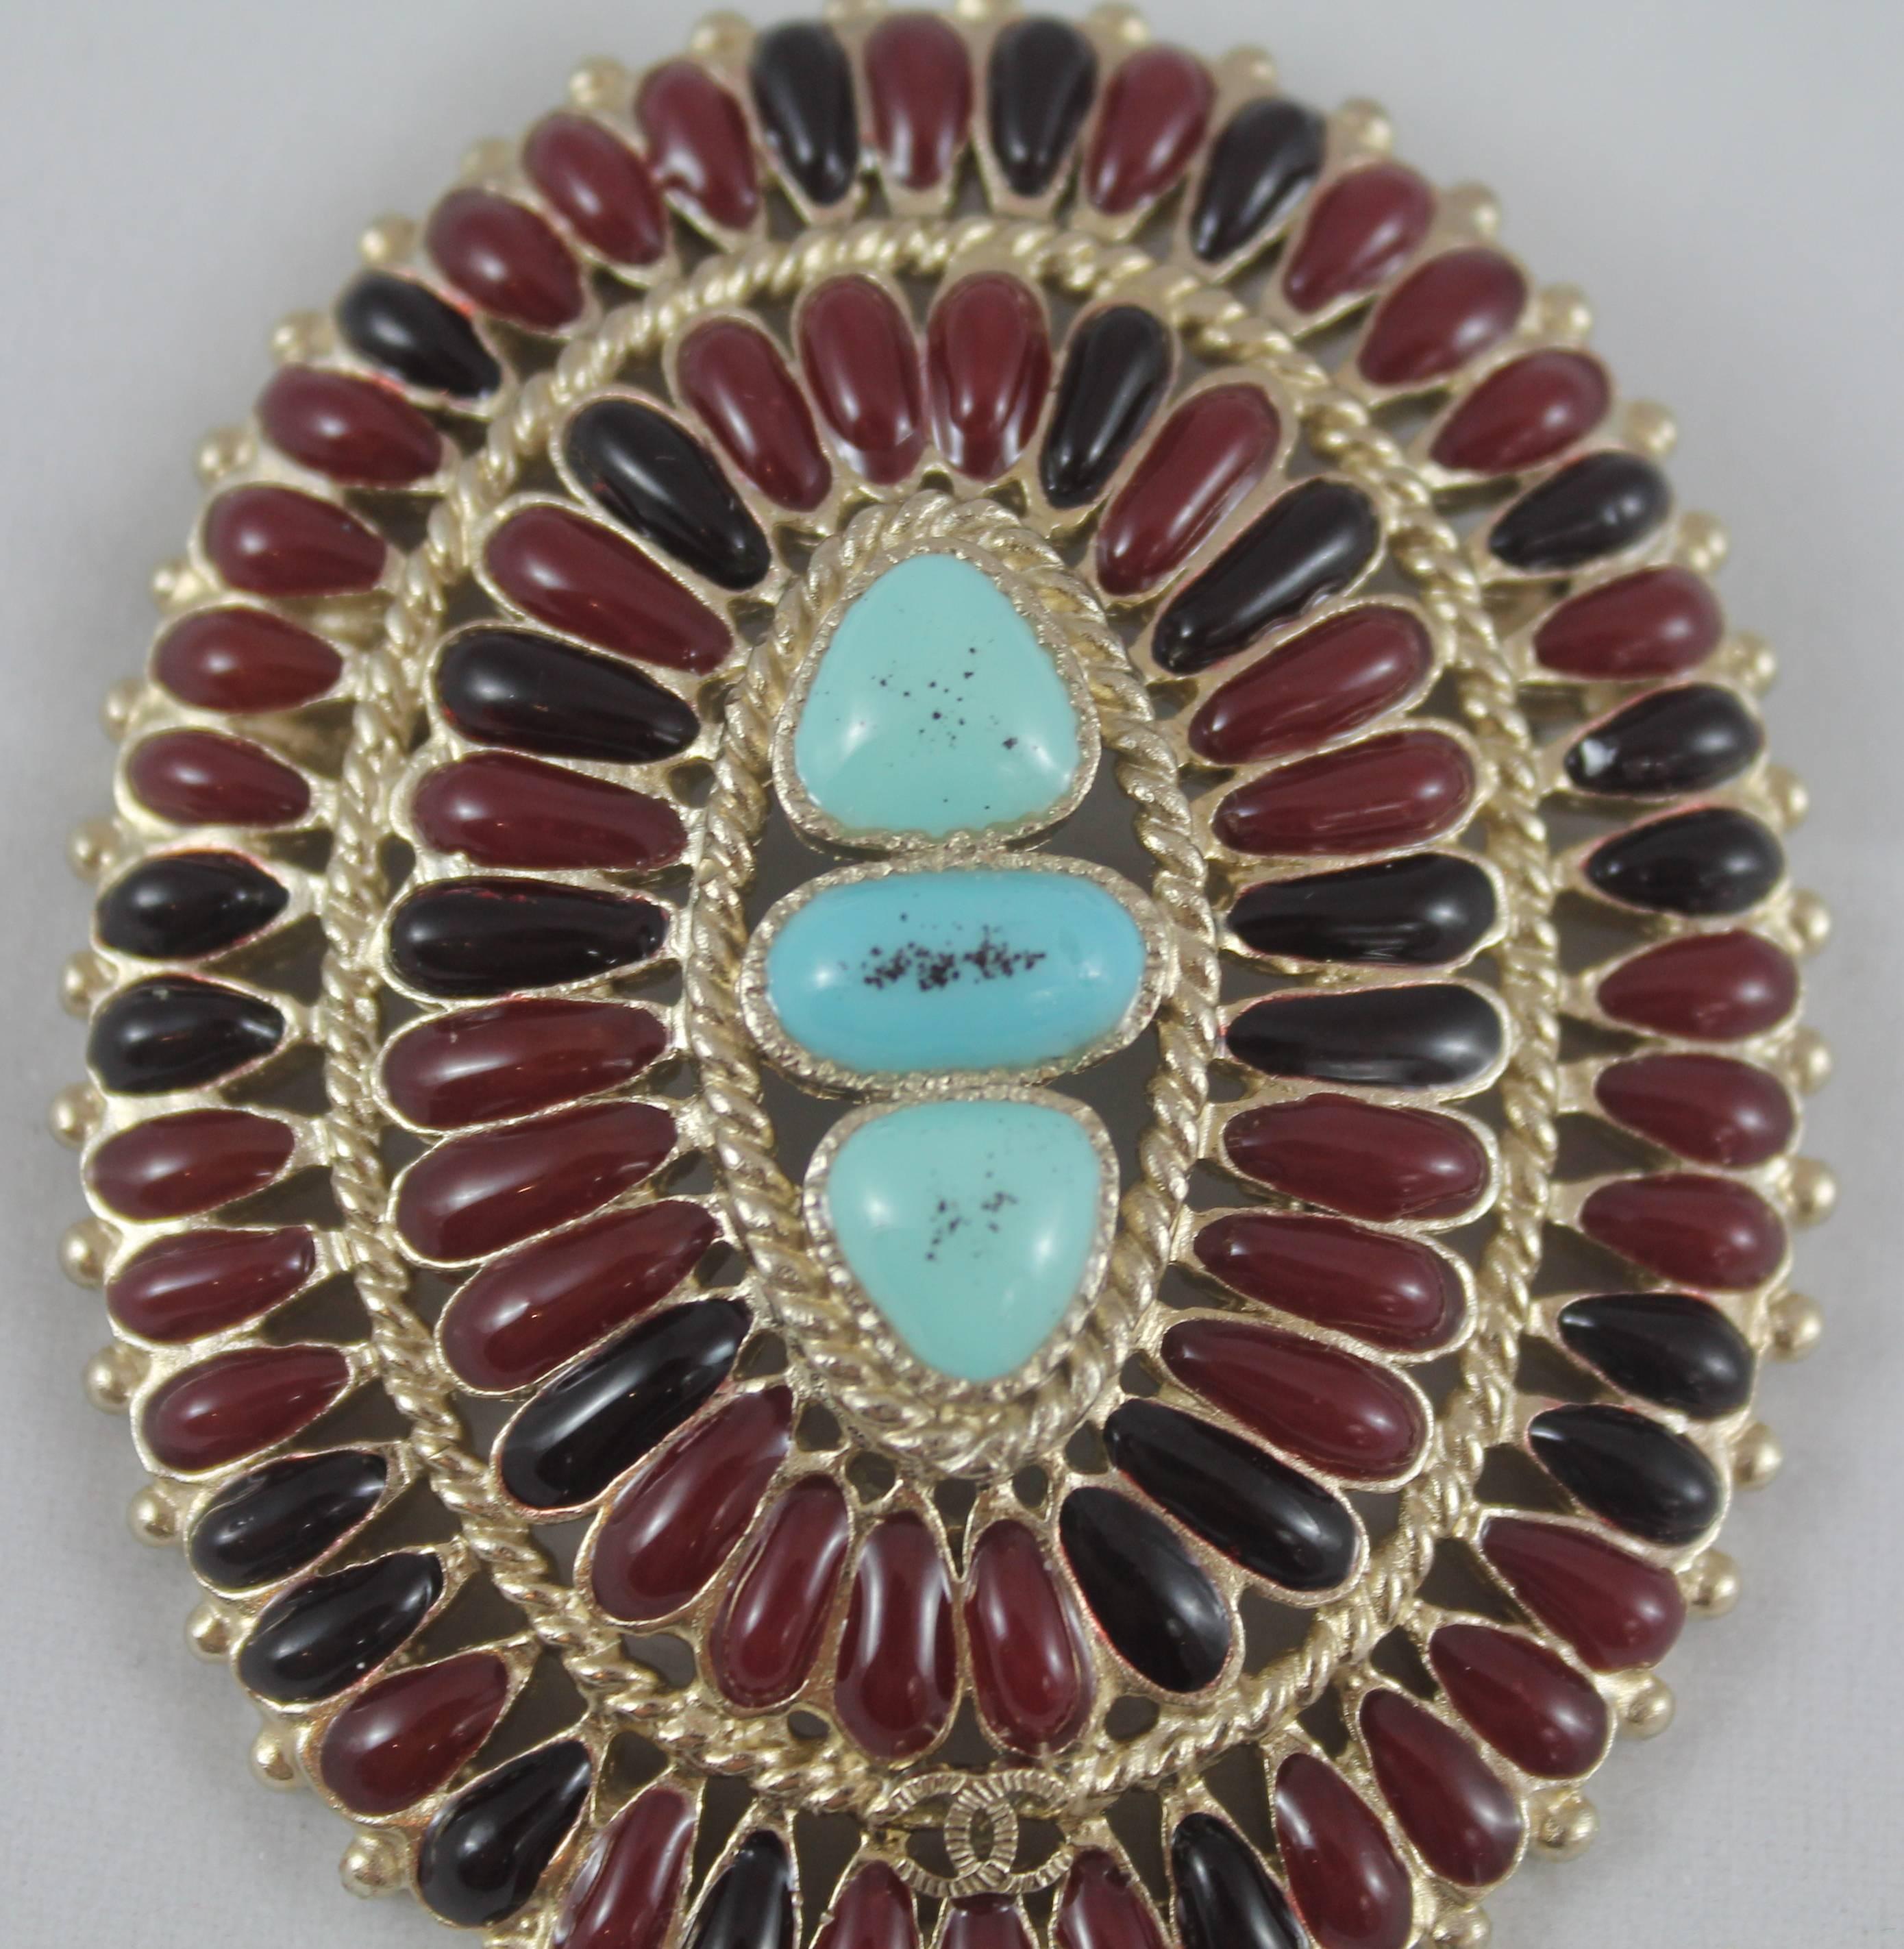 Chanel Byzantine Goldtone Red Gripoix & Turquoise Brooch - 2014. This amazing piece is in excellent condition and is from Autumn 2014. The brooch features multi-tone red gripoix stones in a circle, 3 center turquoise colored stones, entwined gold,